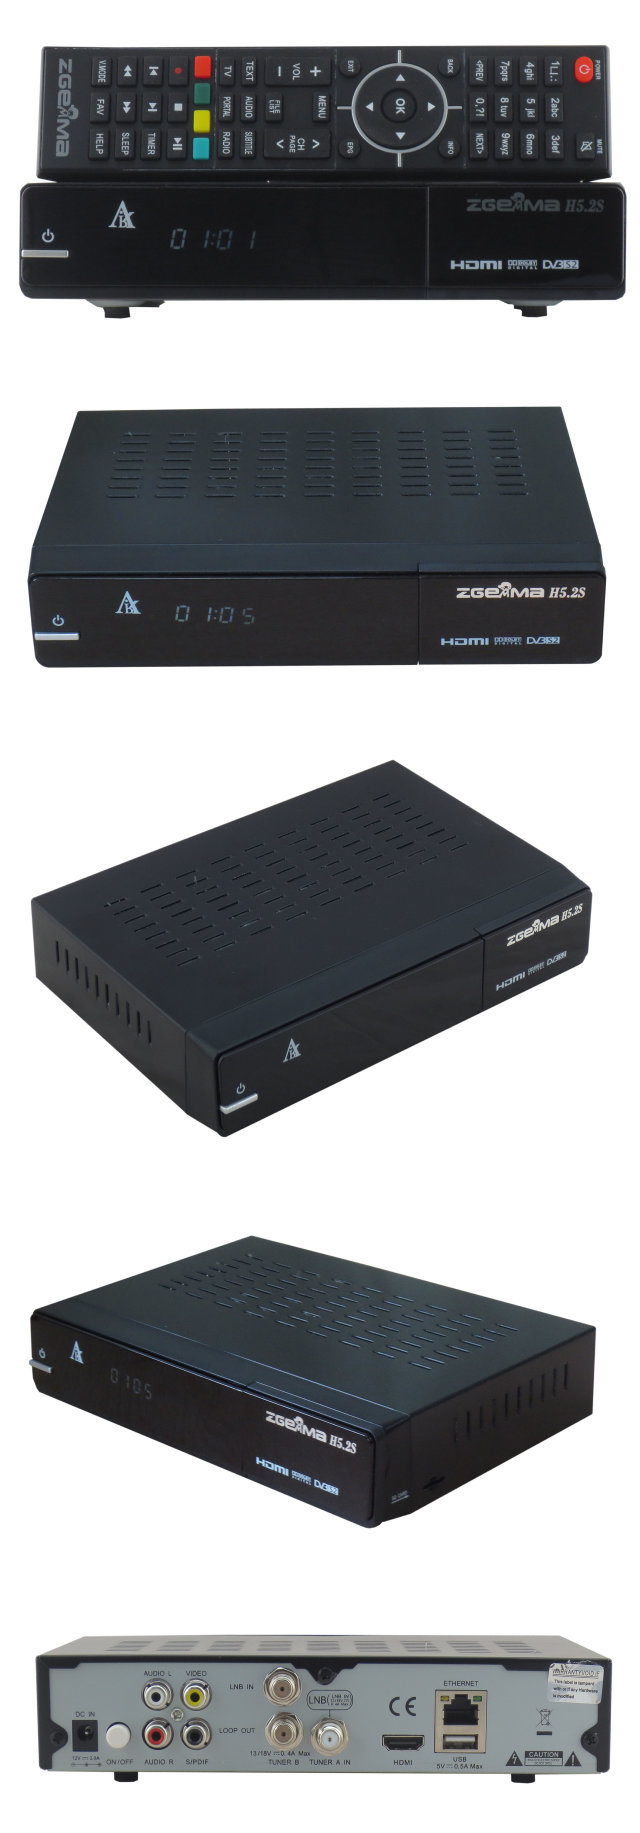 New H. 265 Hevc Satellite Receiver Zgemma H5.2s with Twin DVB-S2 Tuners